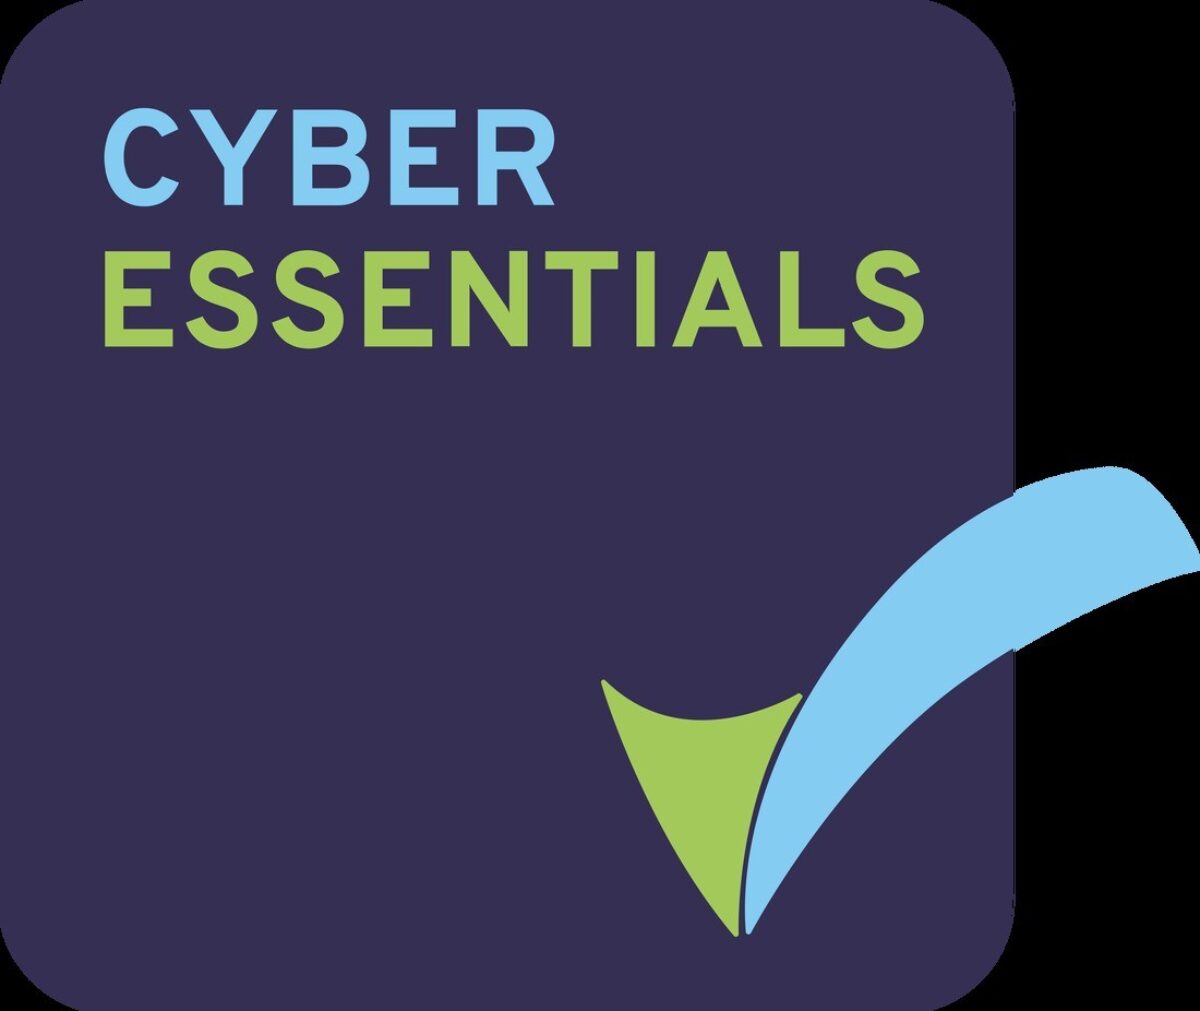 Penny Hydraulics Pass Cyber Essentials Accreditation For Another Year - Penny Hydraulics Ltd